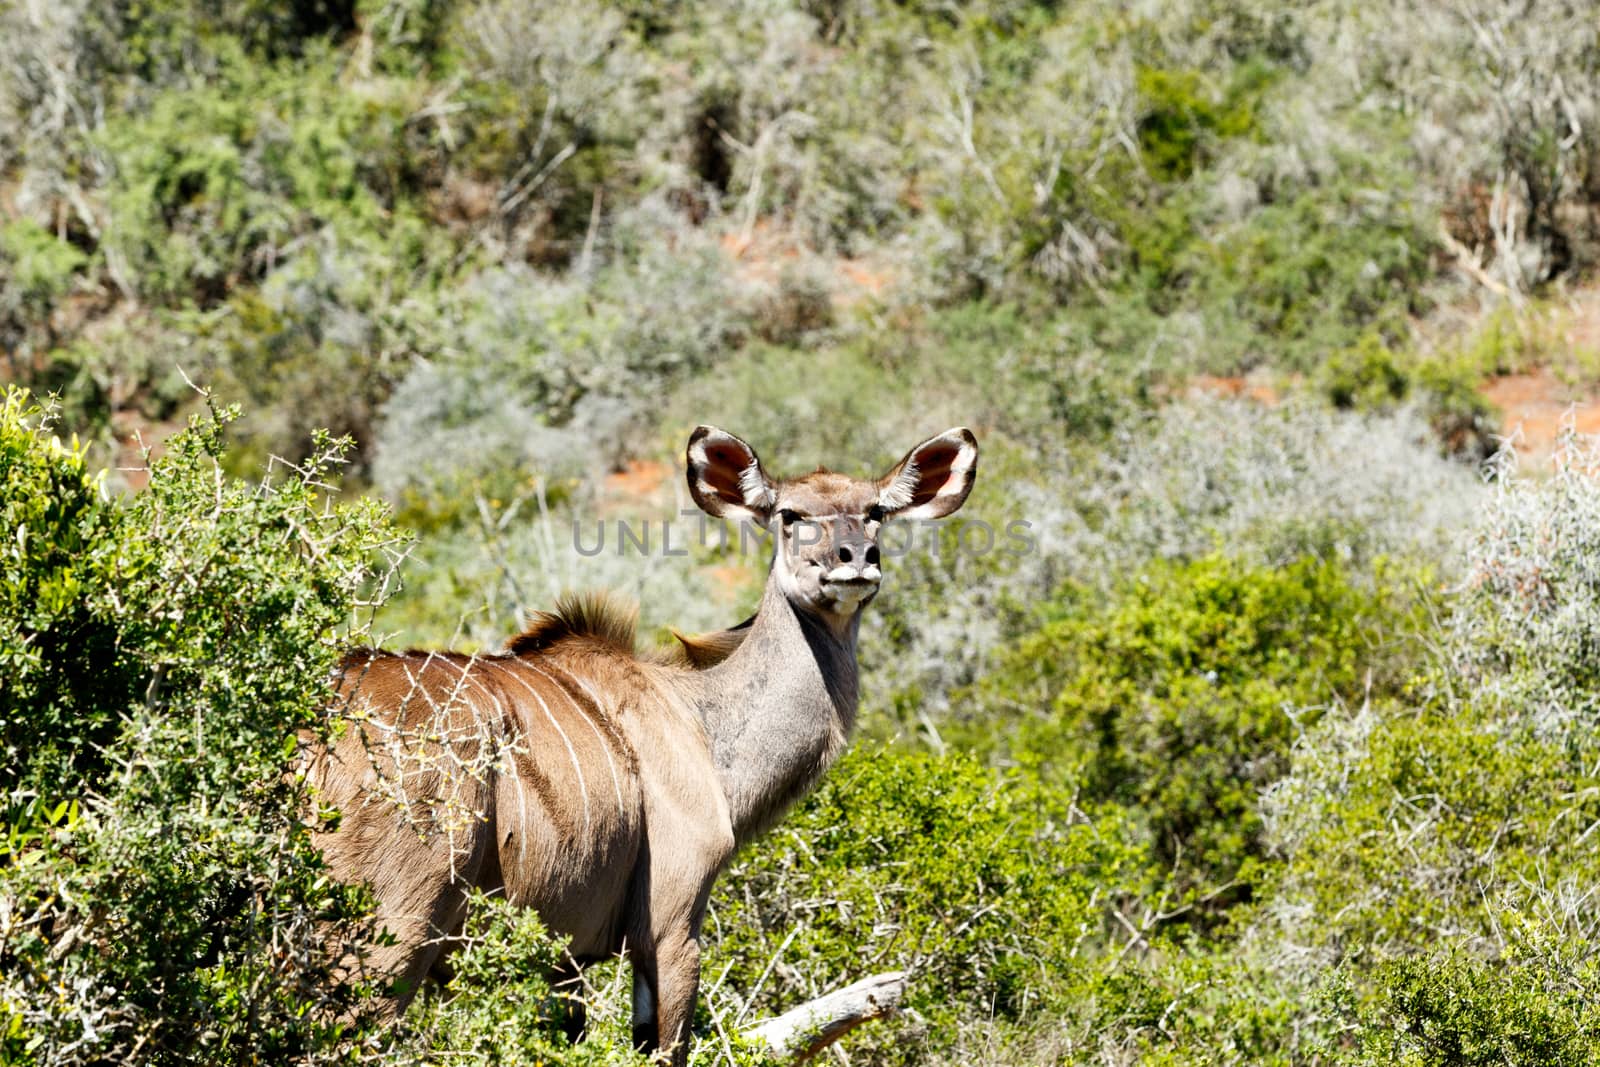 Greater Kudu standing and staring at the camera with his ears straight up.